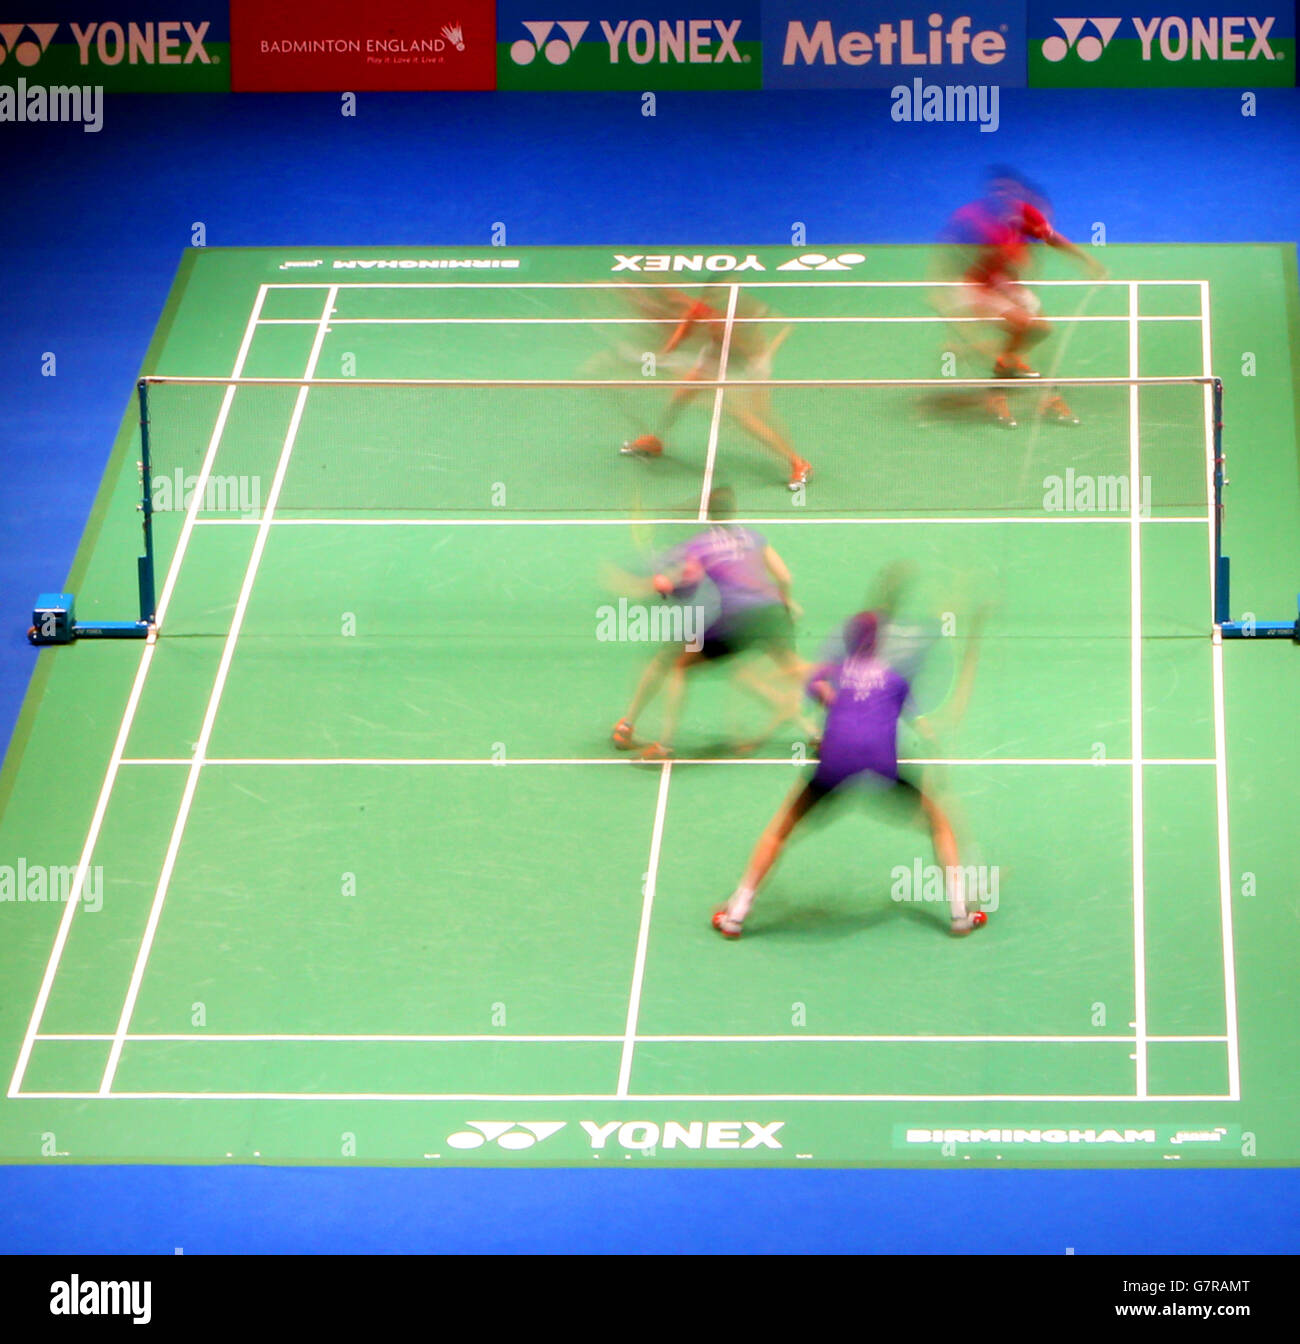 Indonesia's Praveen Jordan and Debby Sustano (top) in action against Denmark's Mads Pieler Kolding and Kamilla Rytter Juhl during their mixed doubles quarter final match Stock Photo